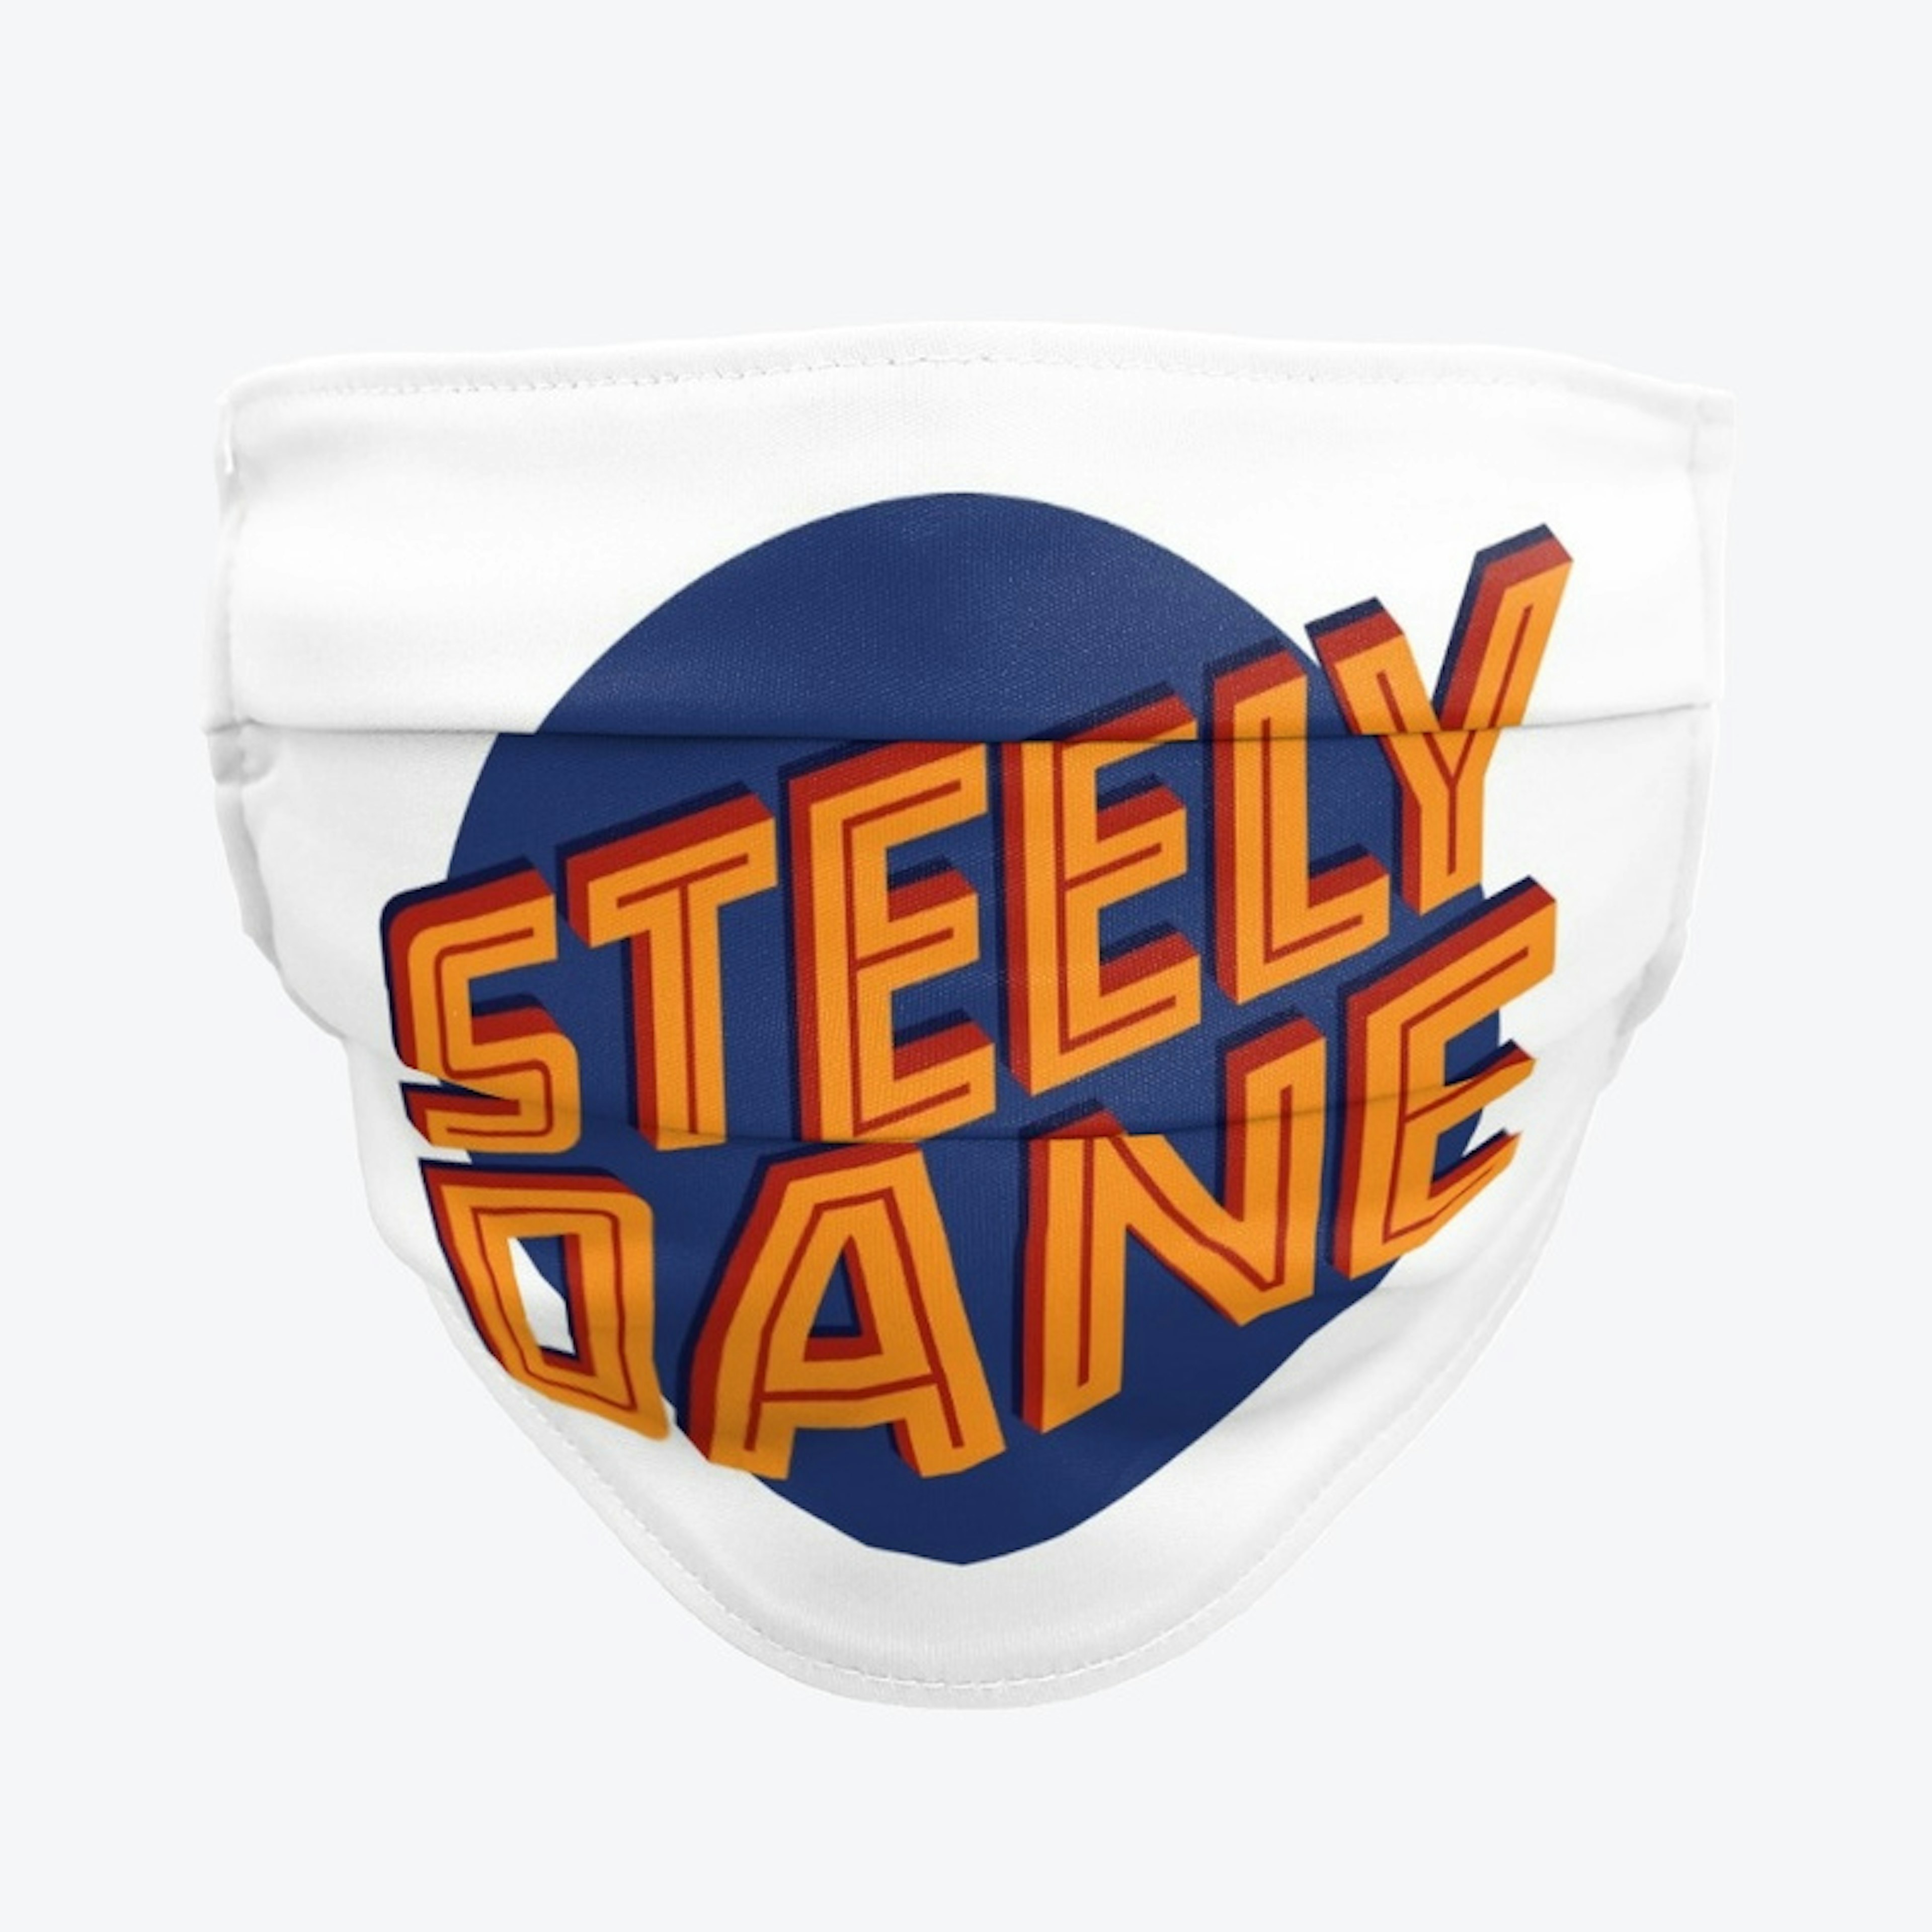 Steely Dane Facemask